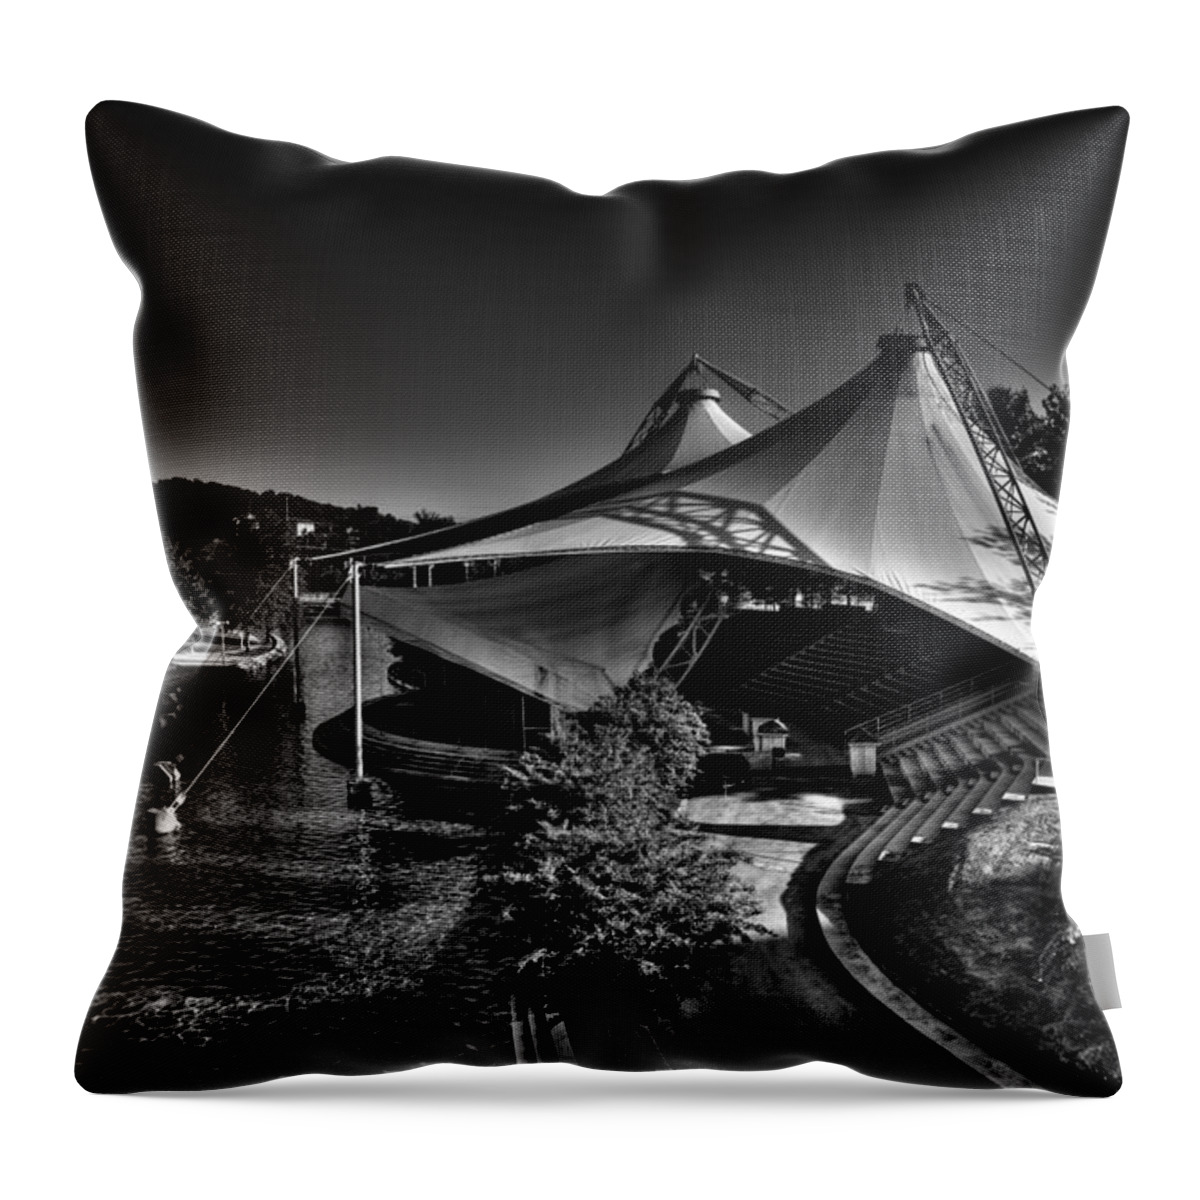 The Tennessee Amphitheater Throw Pillow featuring the photograph The Tennessee Amphitheater by David Patterson